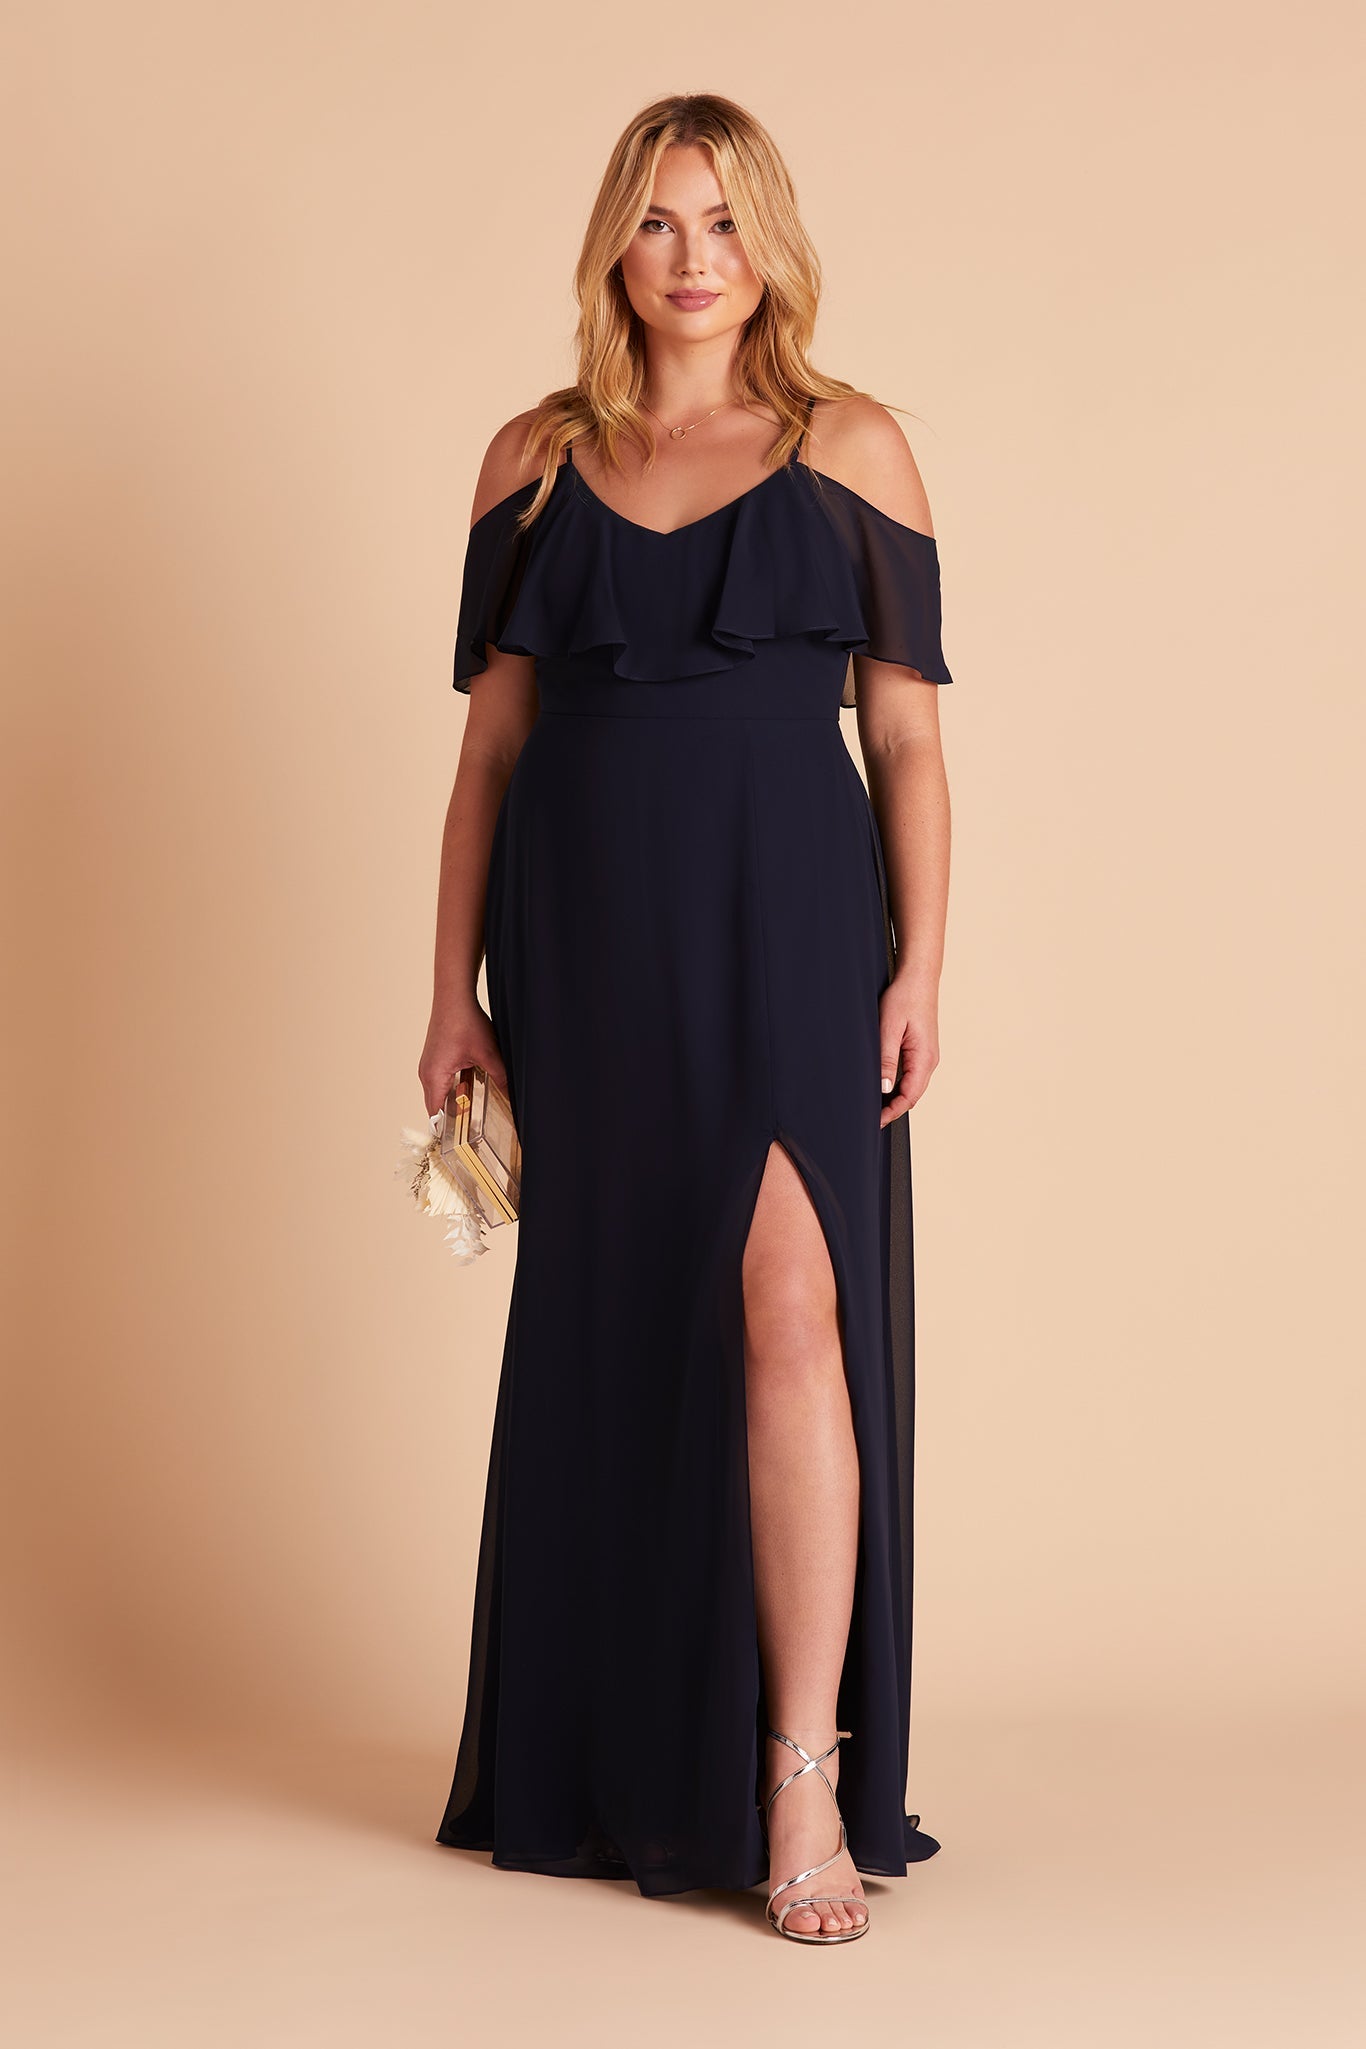 Jane convertible plus size bridesmaid dress with slit in navy blue chiffon by Birdy Grey, front view